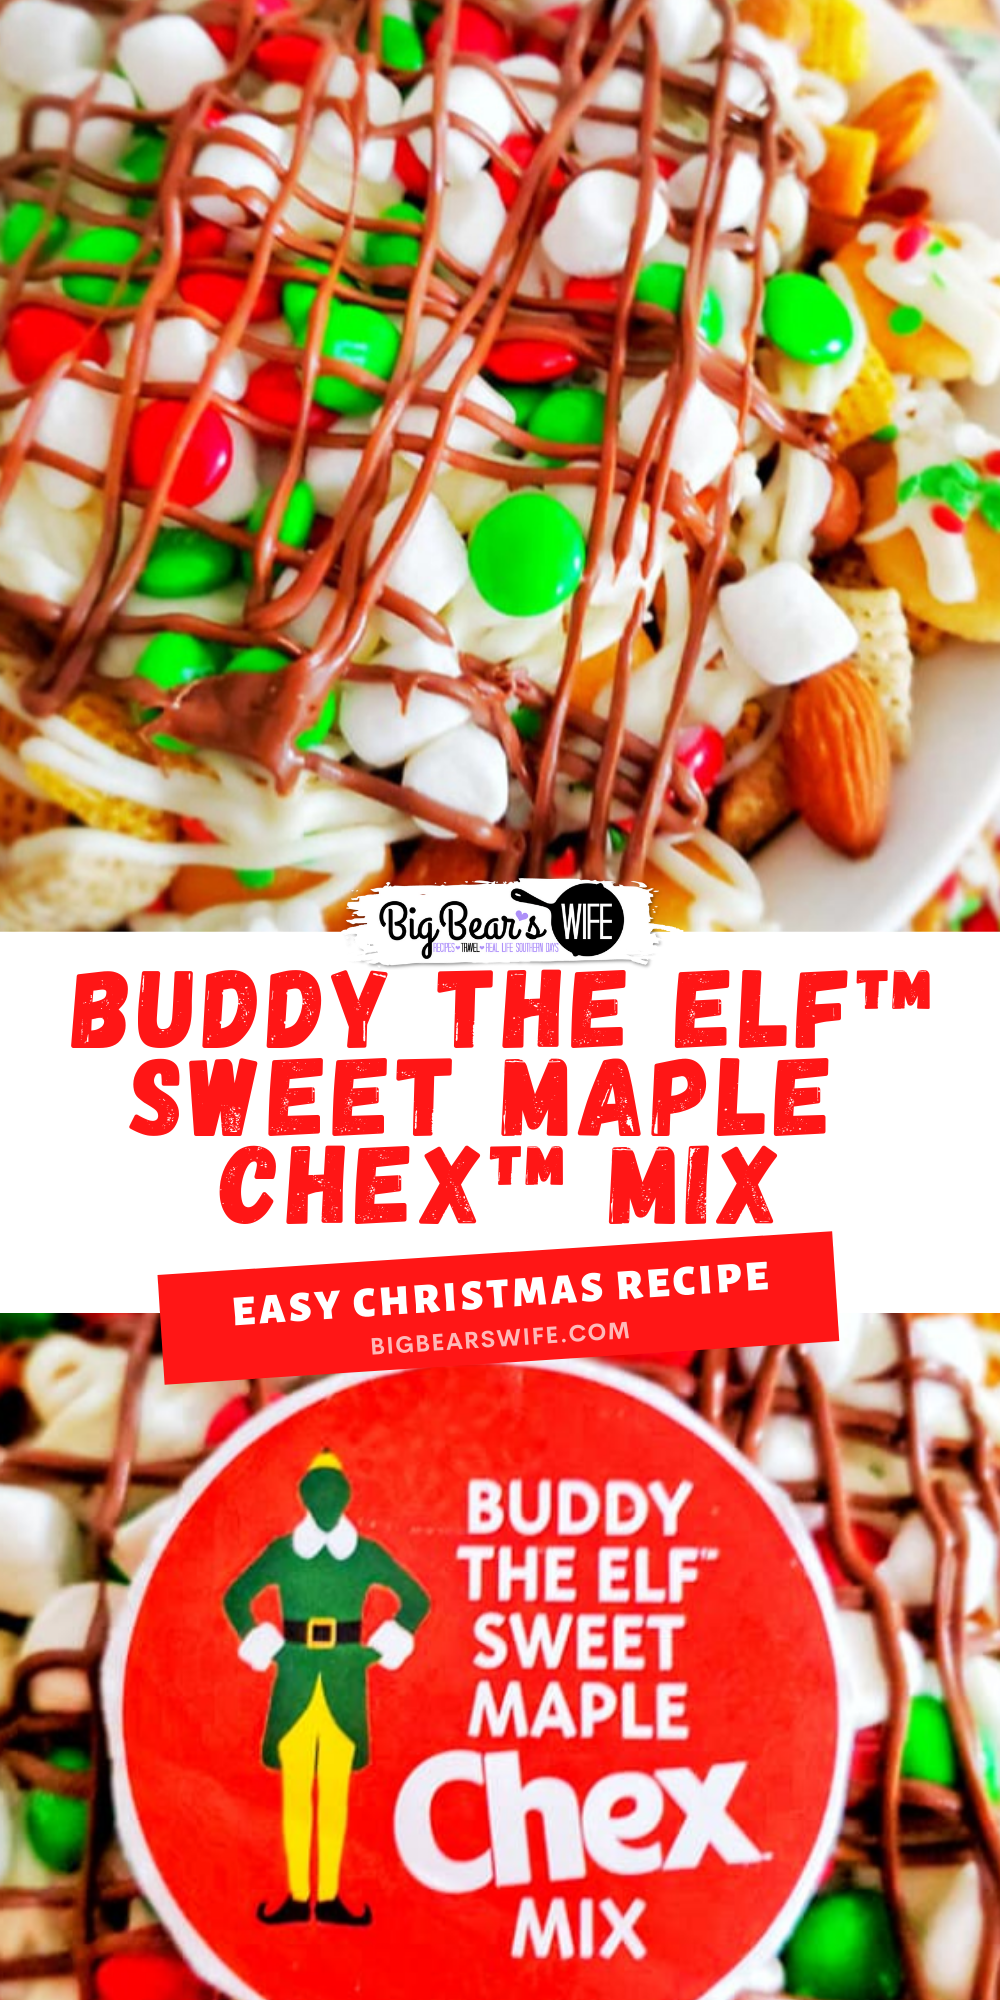 Buddy The Elf Sweet Maple Chex Mix is a chex mix version of Buddy the Elf's Breakfast Spaghetti! Maple-sweetened Chex, Cinnamon Chex, mini cookies and pretzels get topped with white chocolate “spaghetti, M&Ms and mini marshmallows. Don't forget the melted chocolate for the "Chocolate Syrup" drizzle! via @bigbearswife